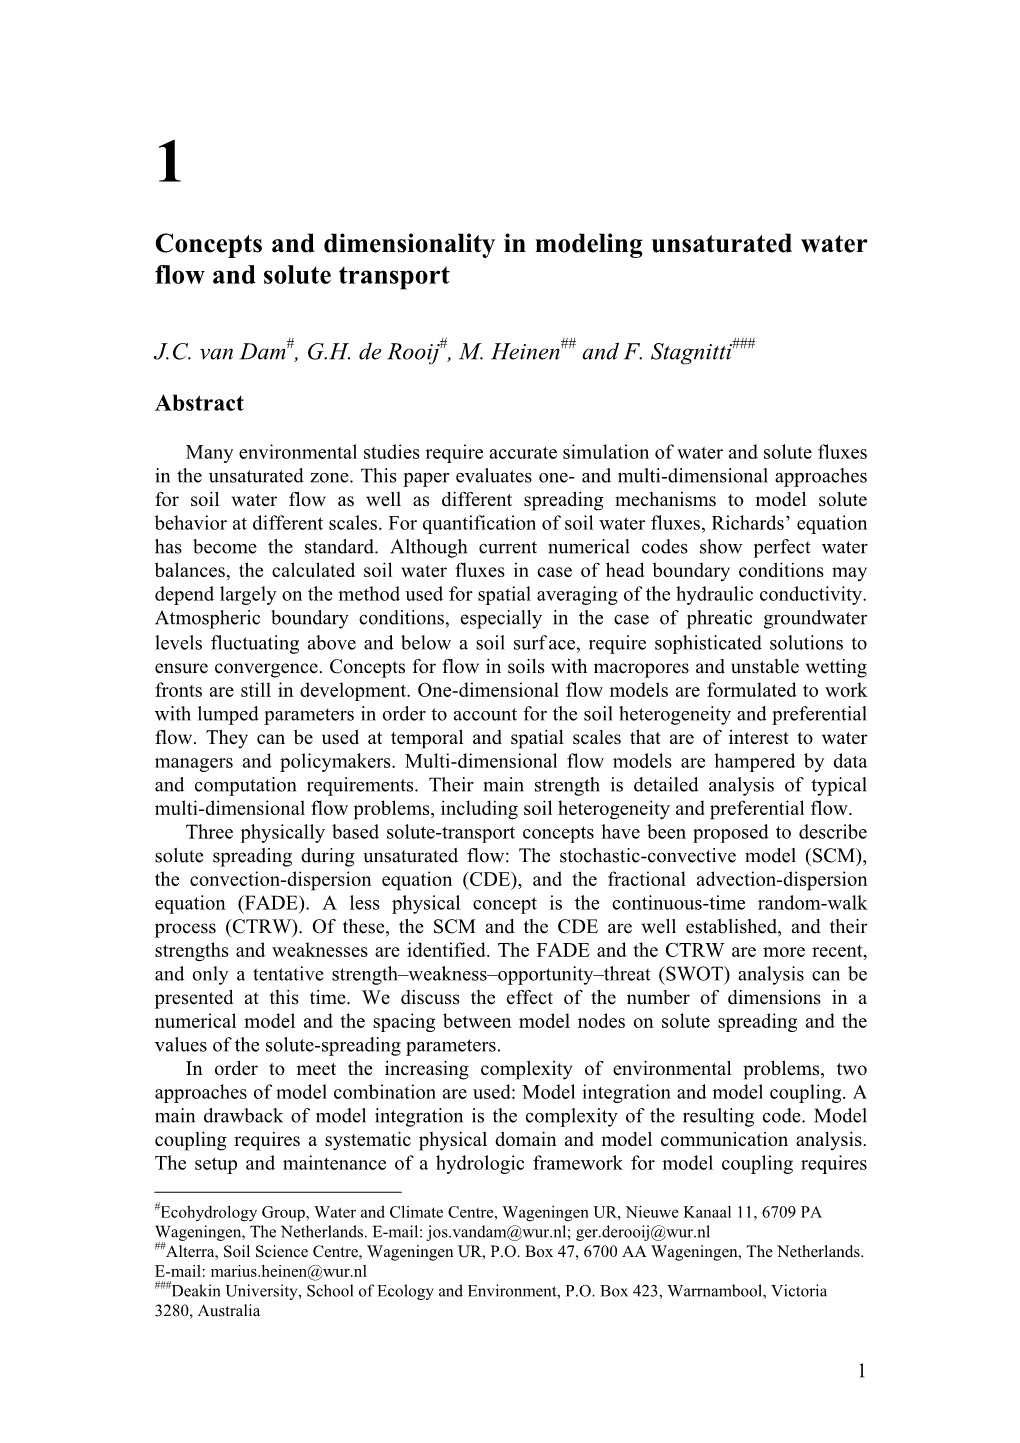 Concepts and Dimensionality in Modeling Unsaturated Water Flow and Solute Transport